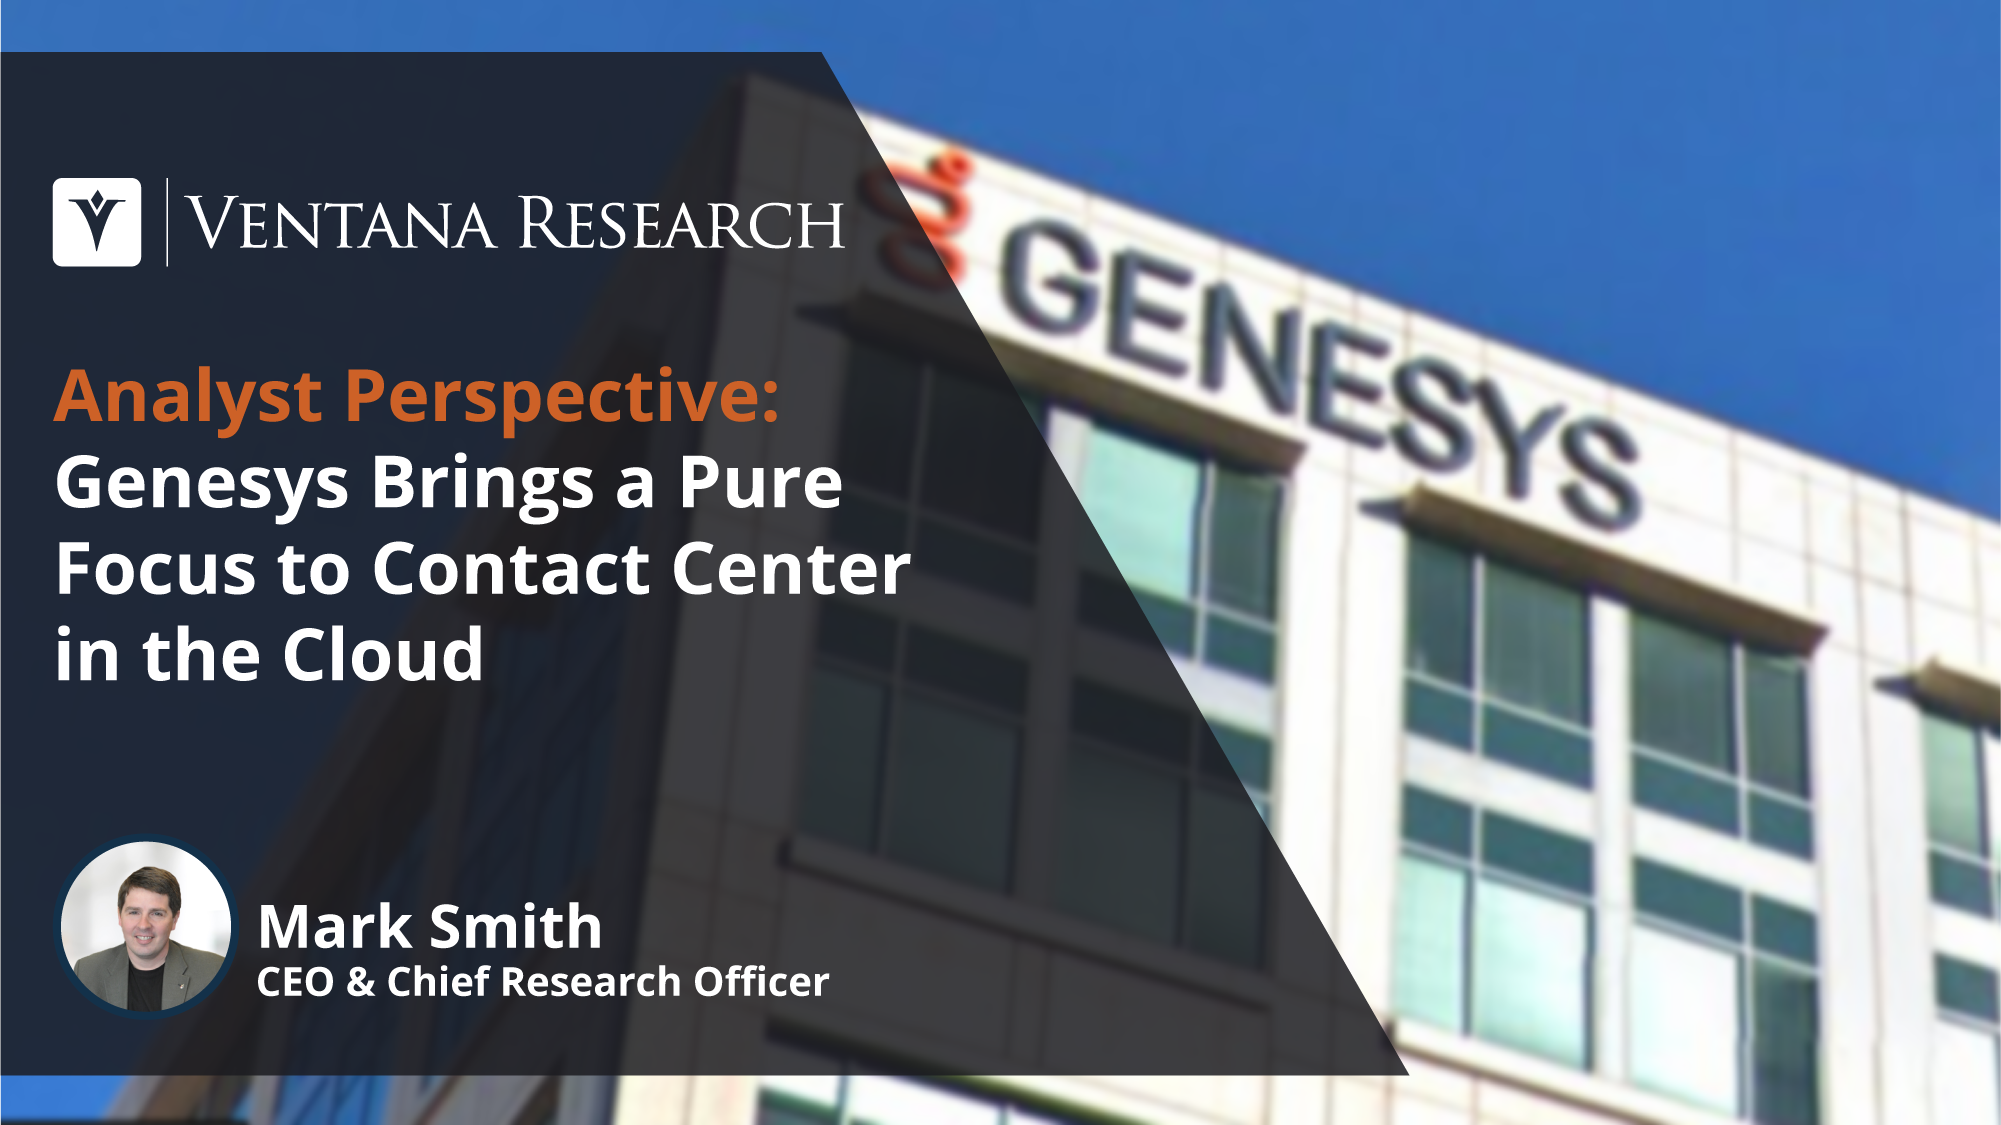 Genesys Brings a Pure Focus to Contact Center in the Cloud